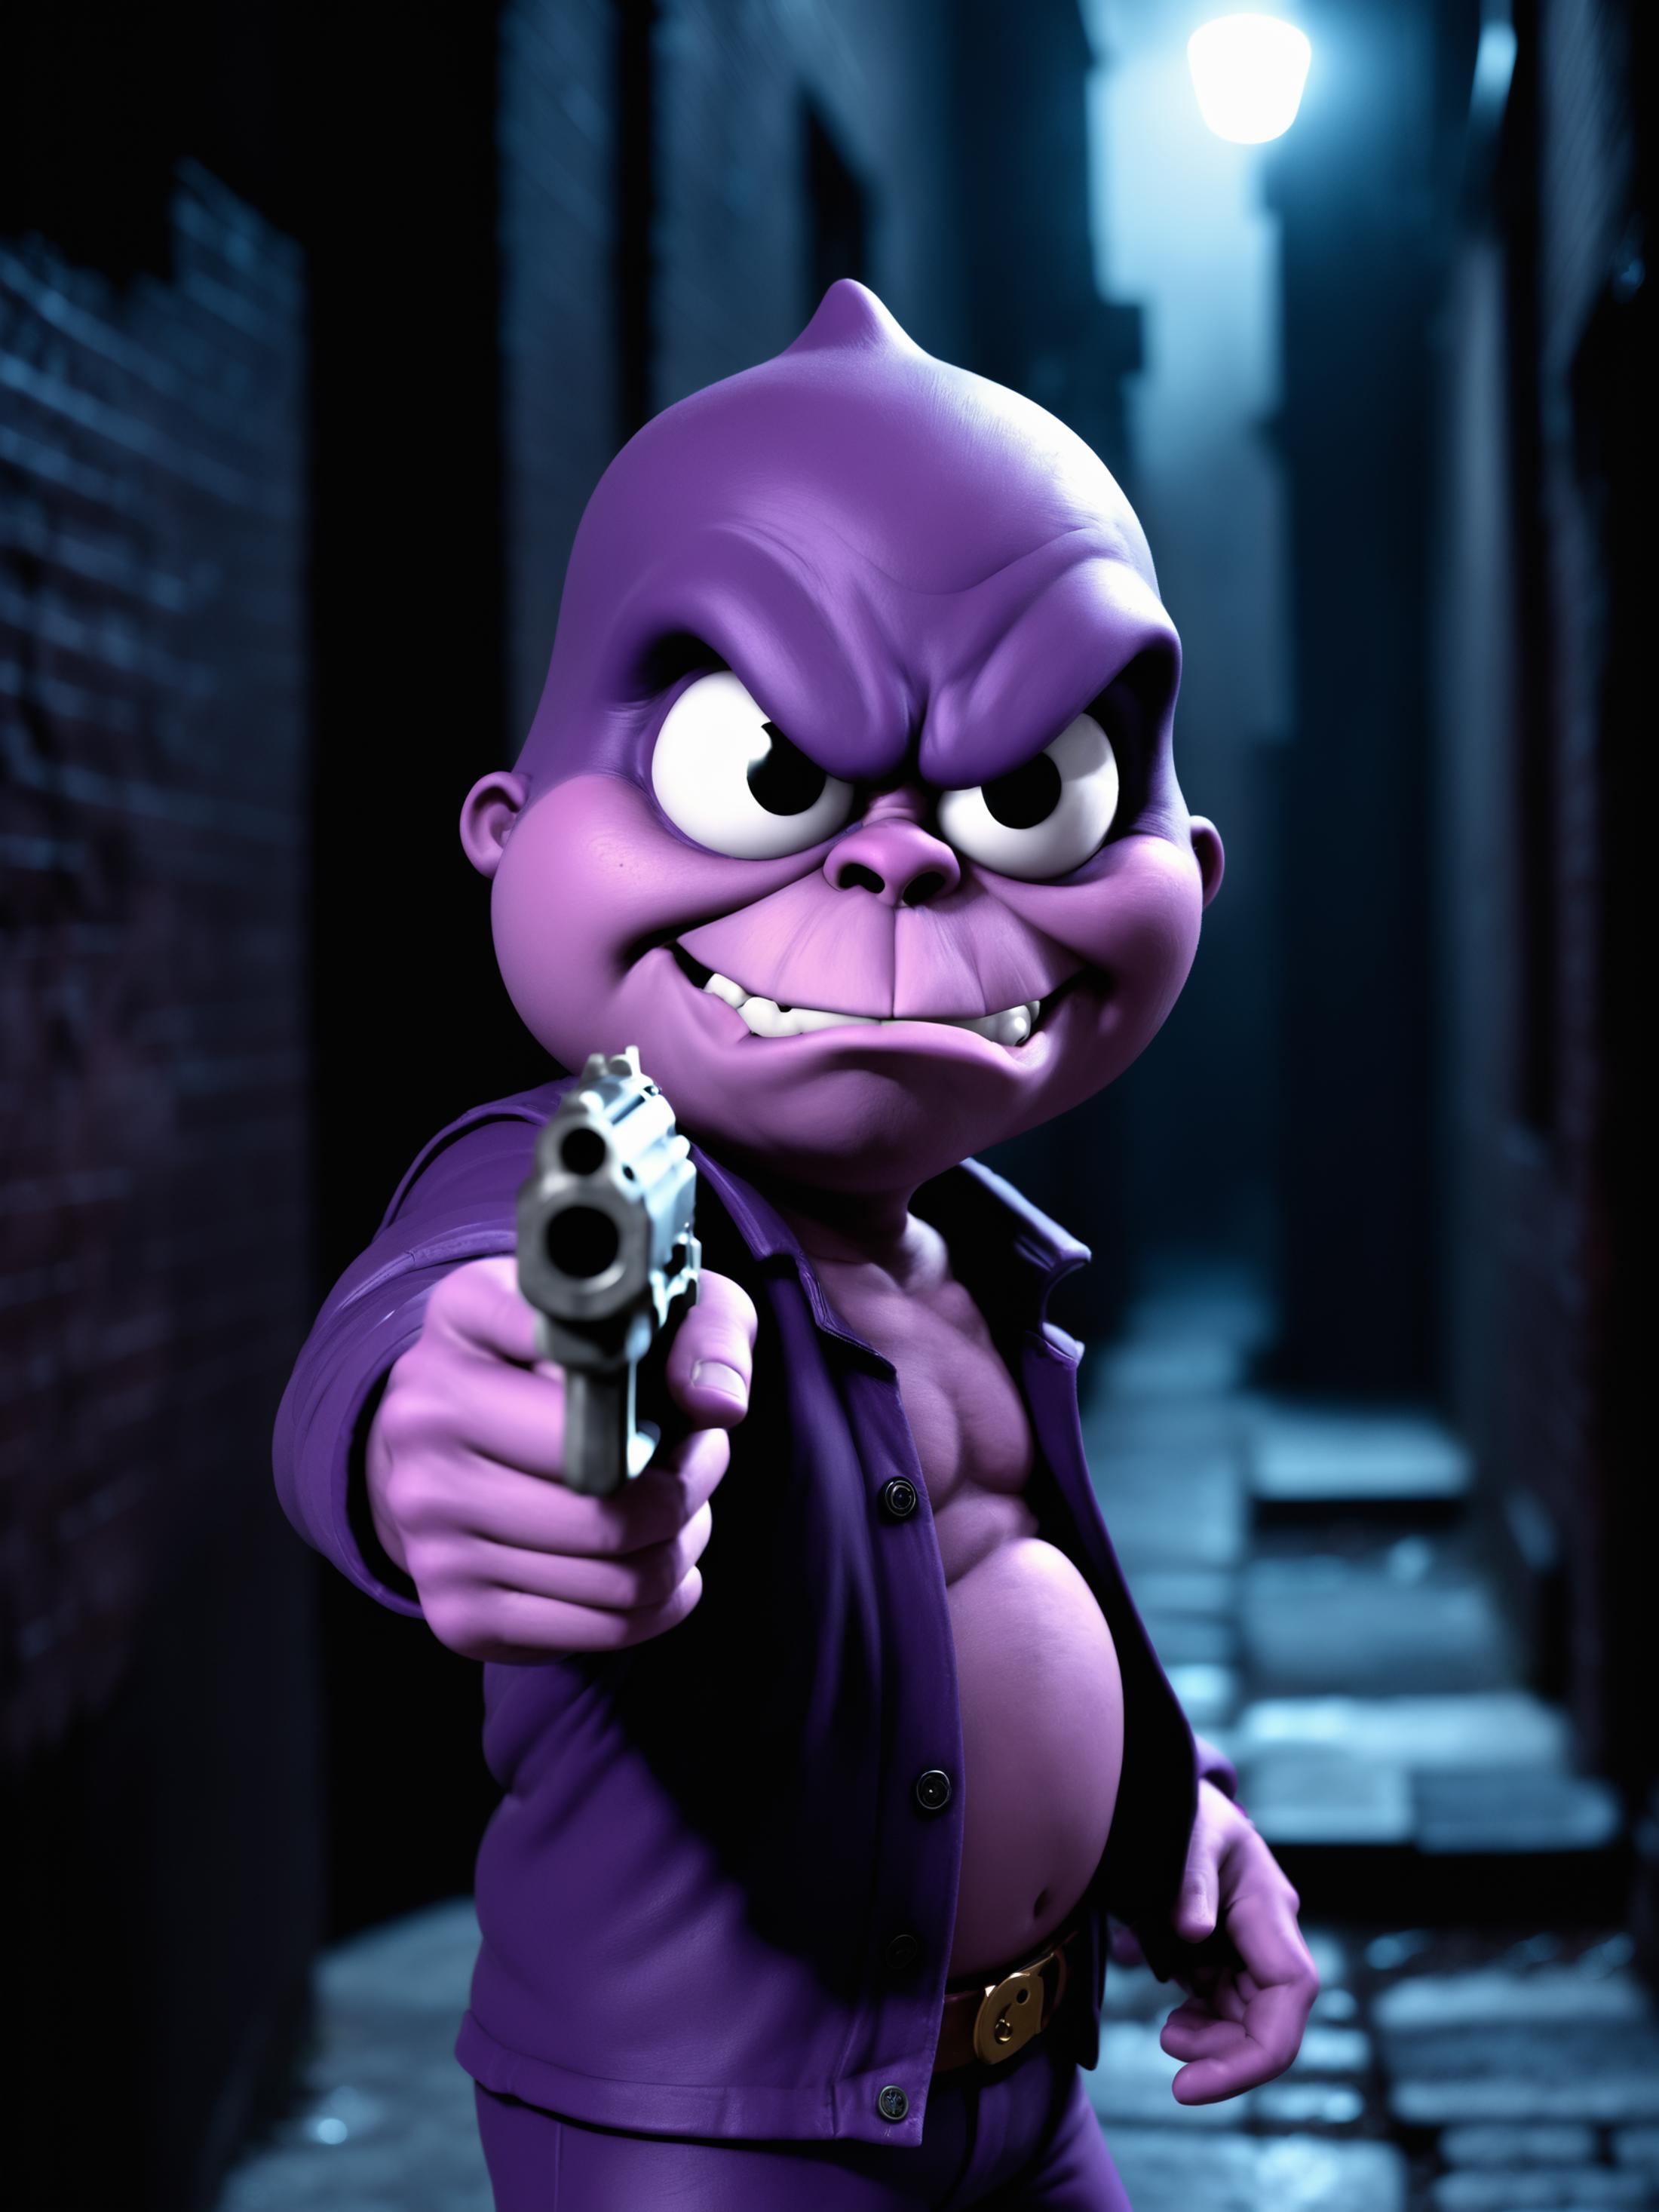 BonziBUDDY image by aiask